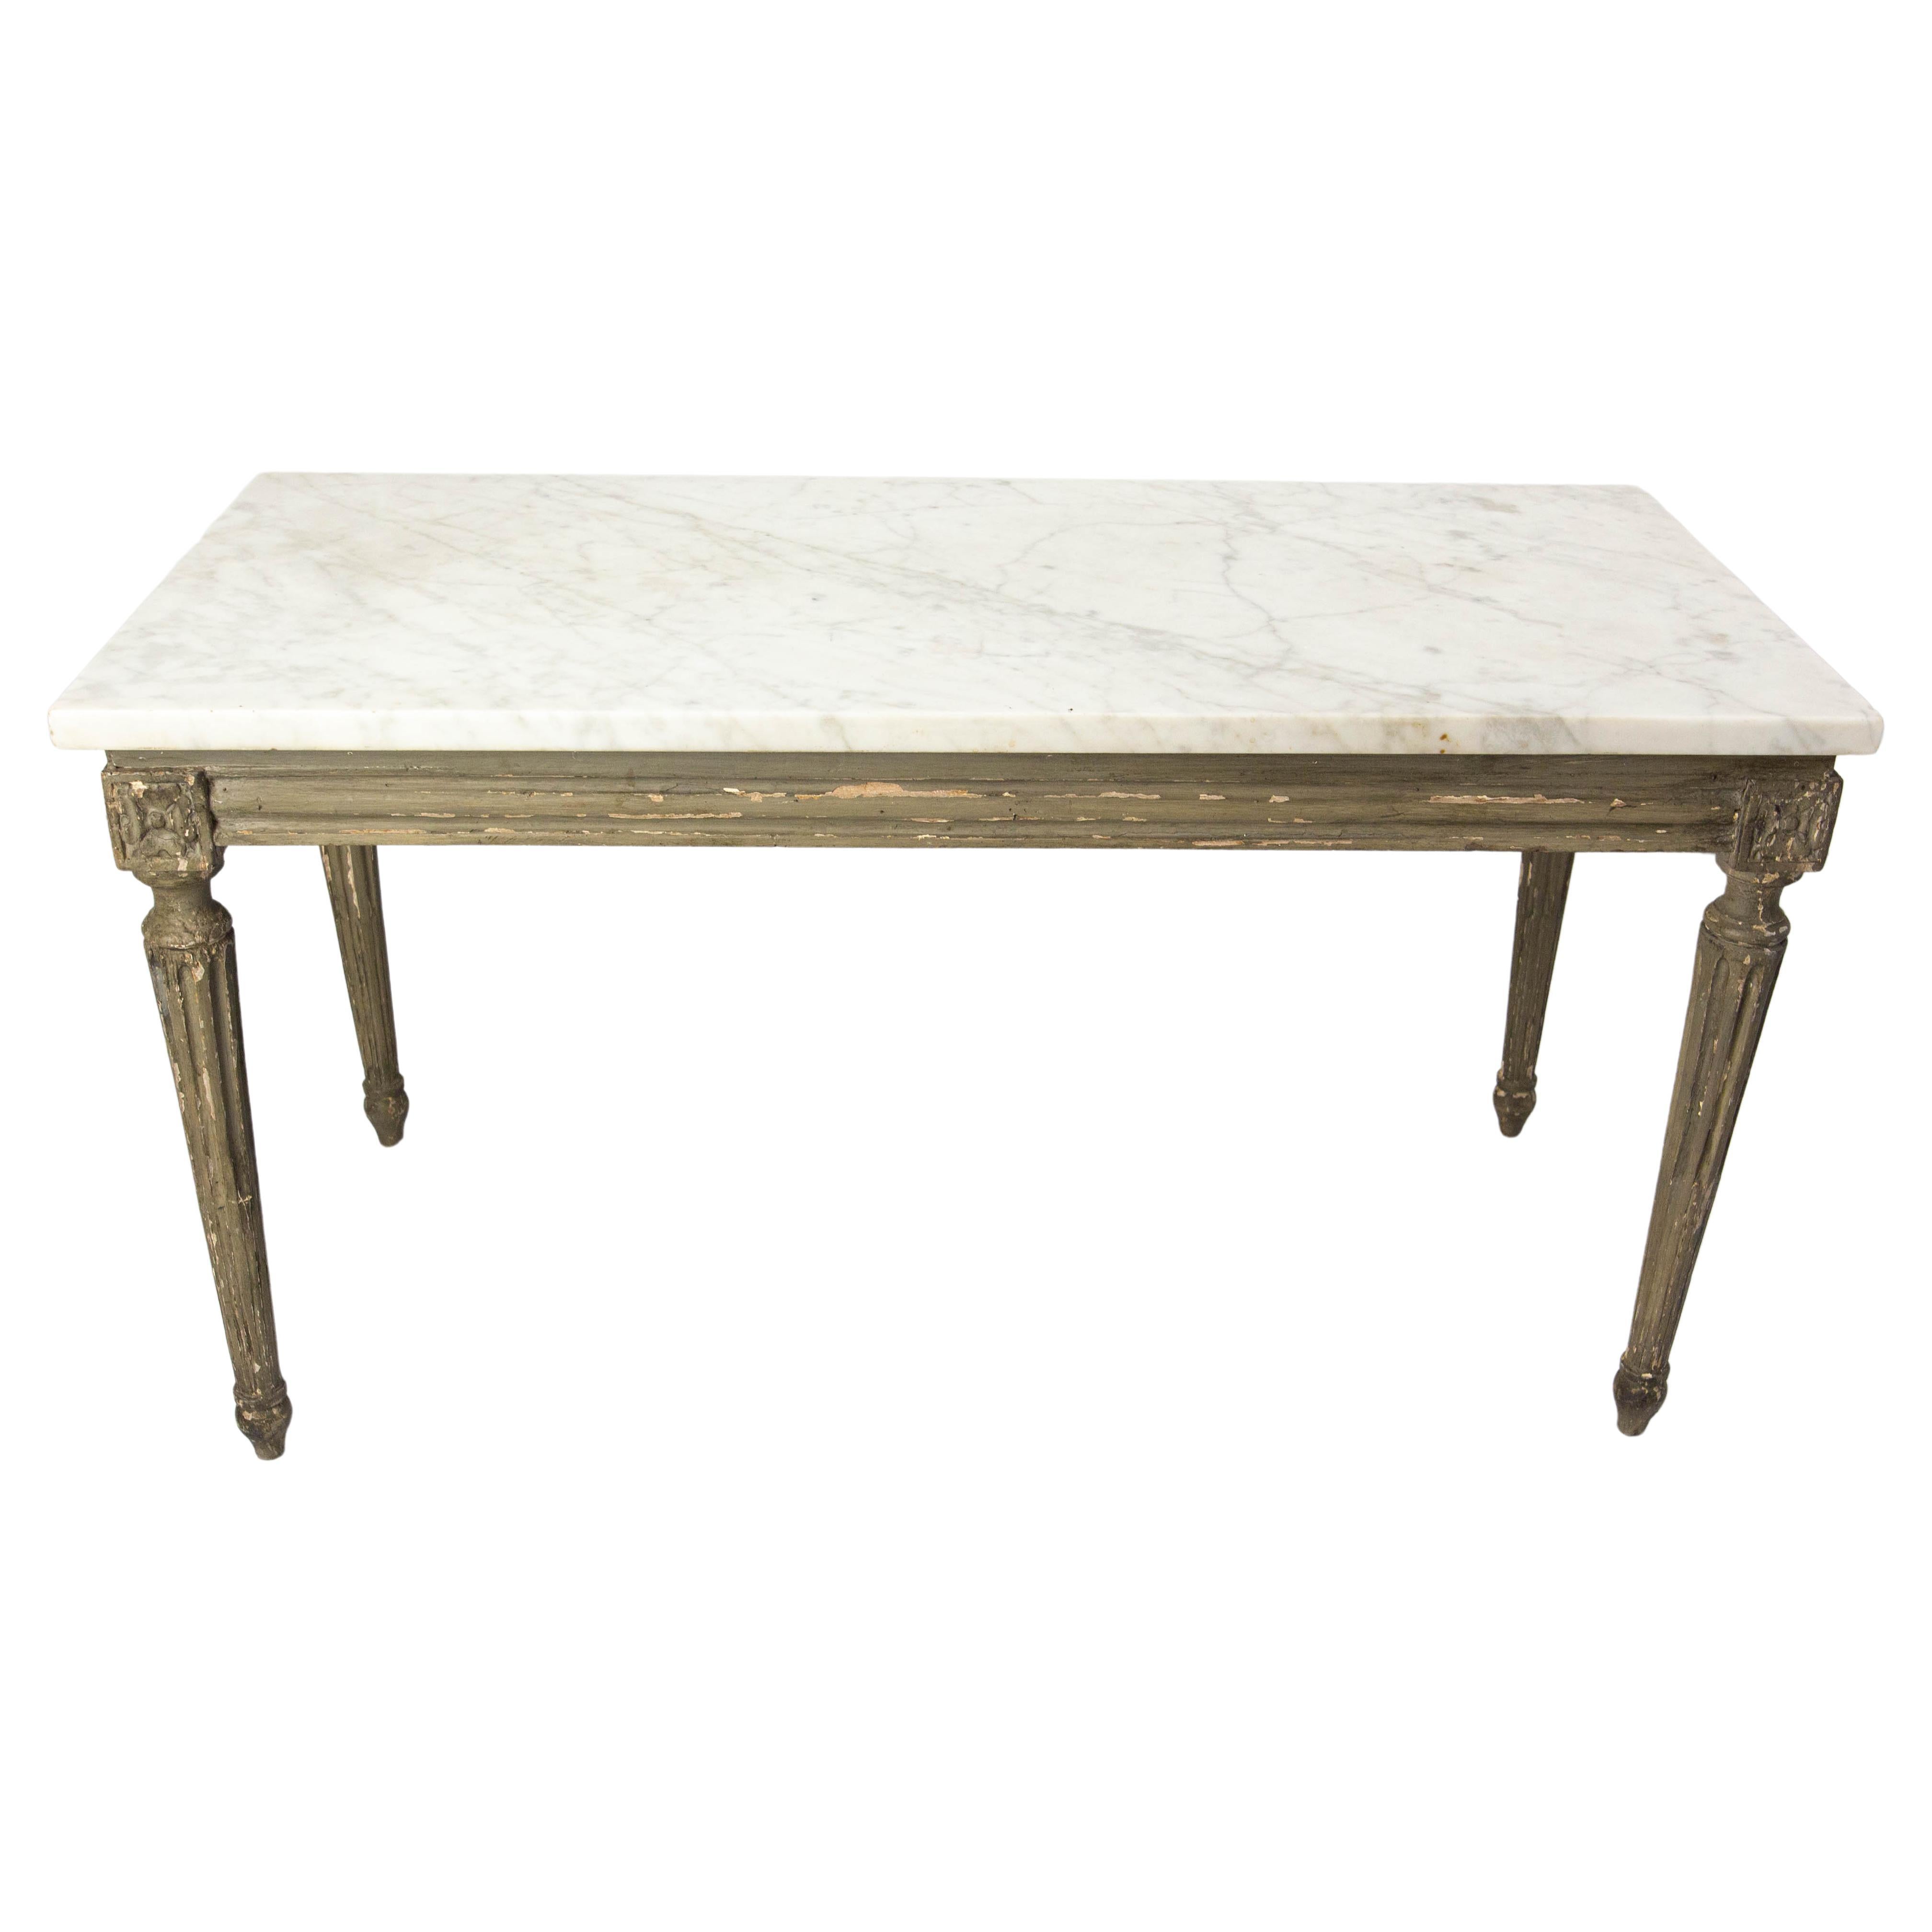 French Louis XVI Painted Wood & Marble Top Coffee Table, late 19th Century For Sale